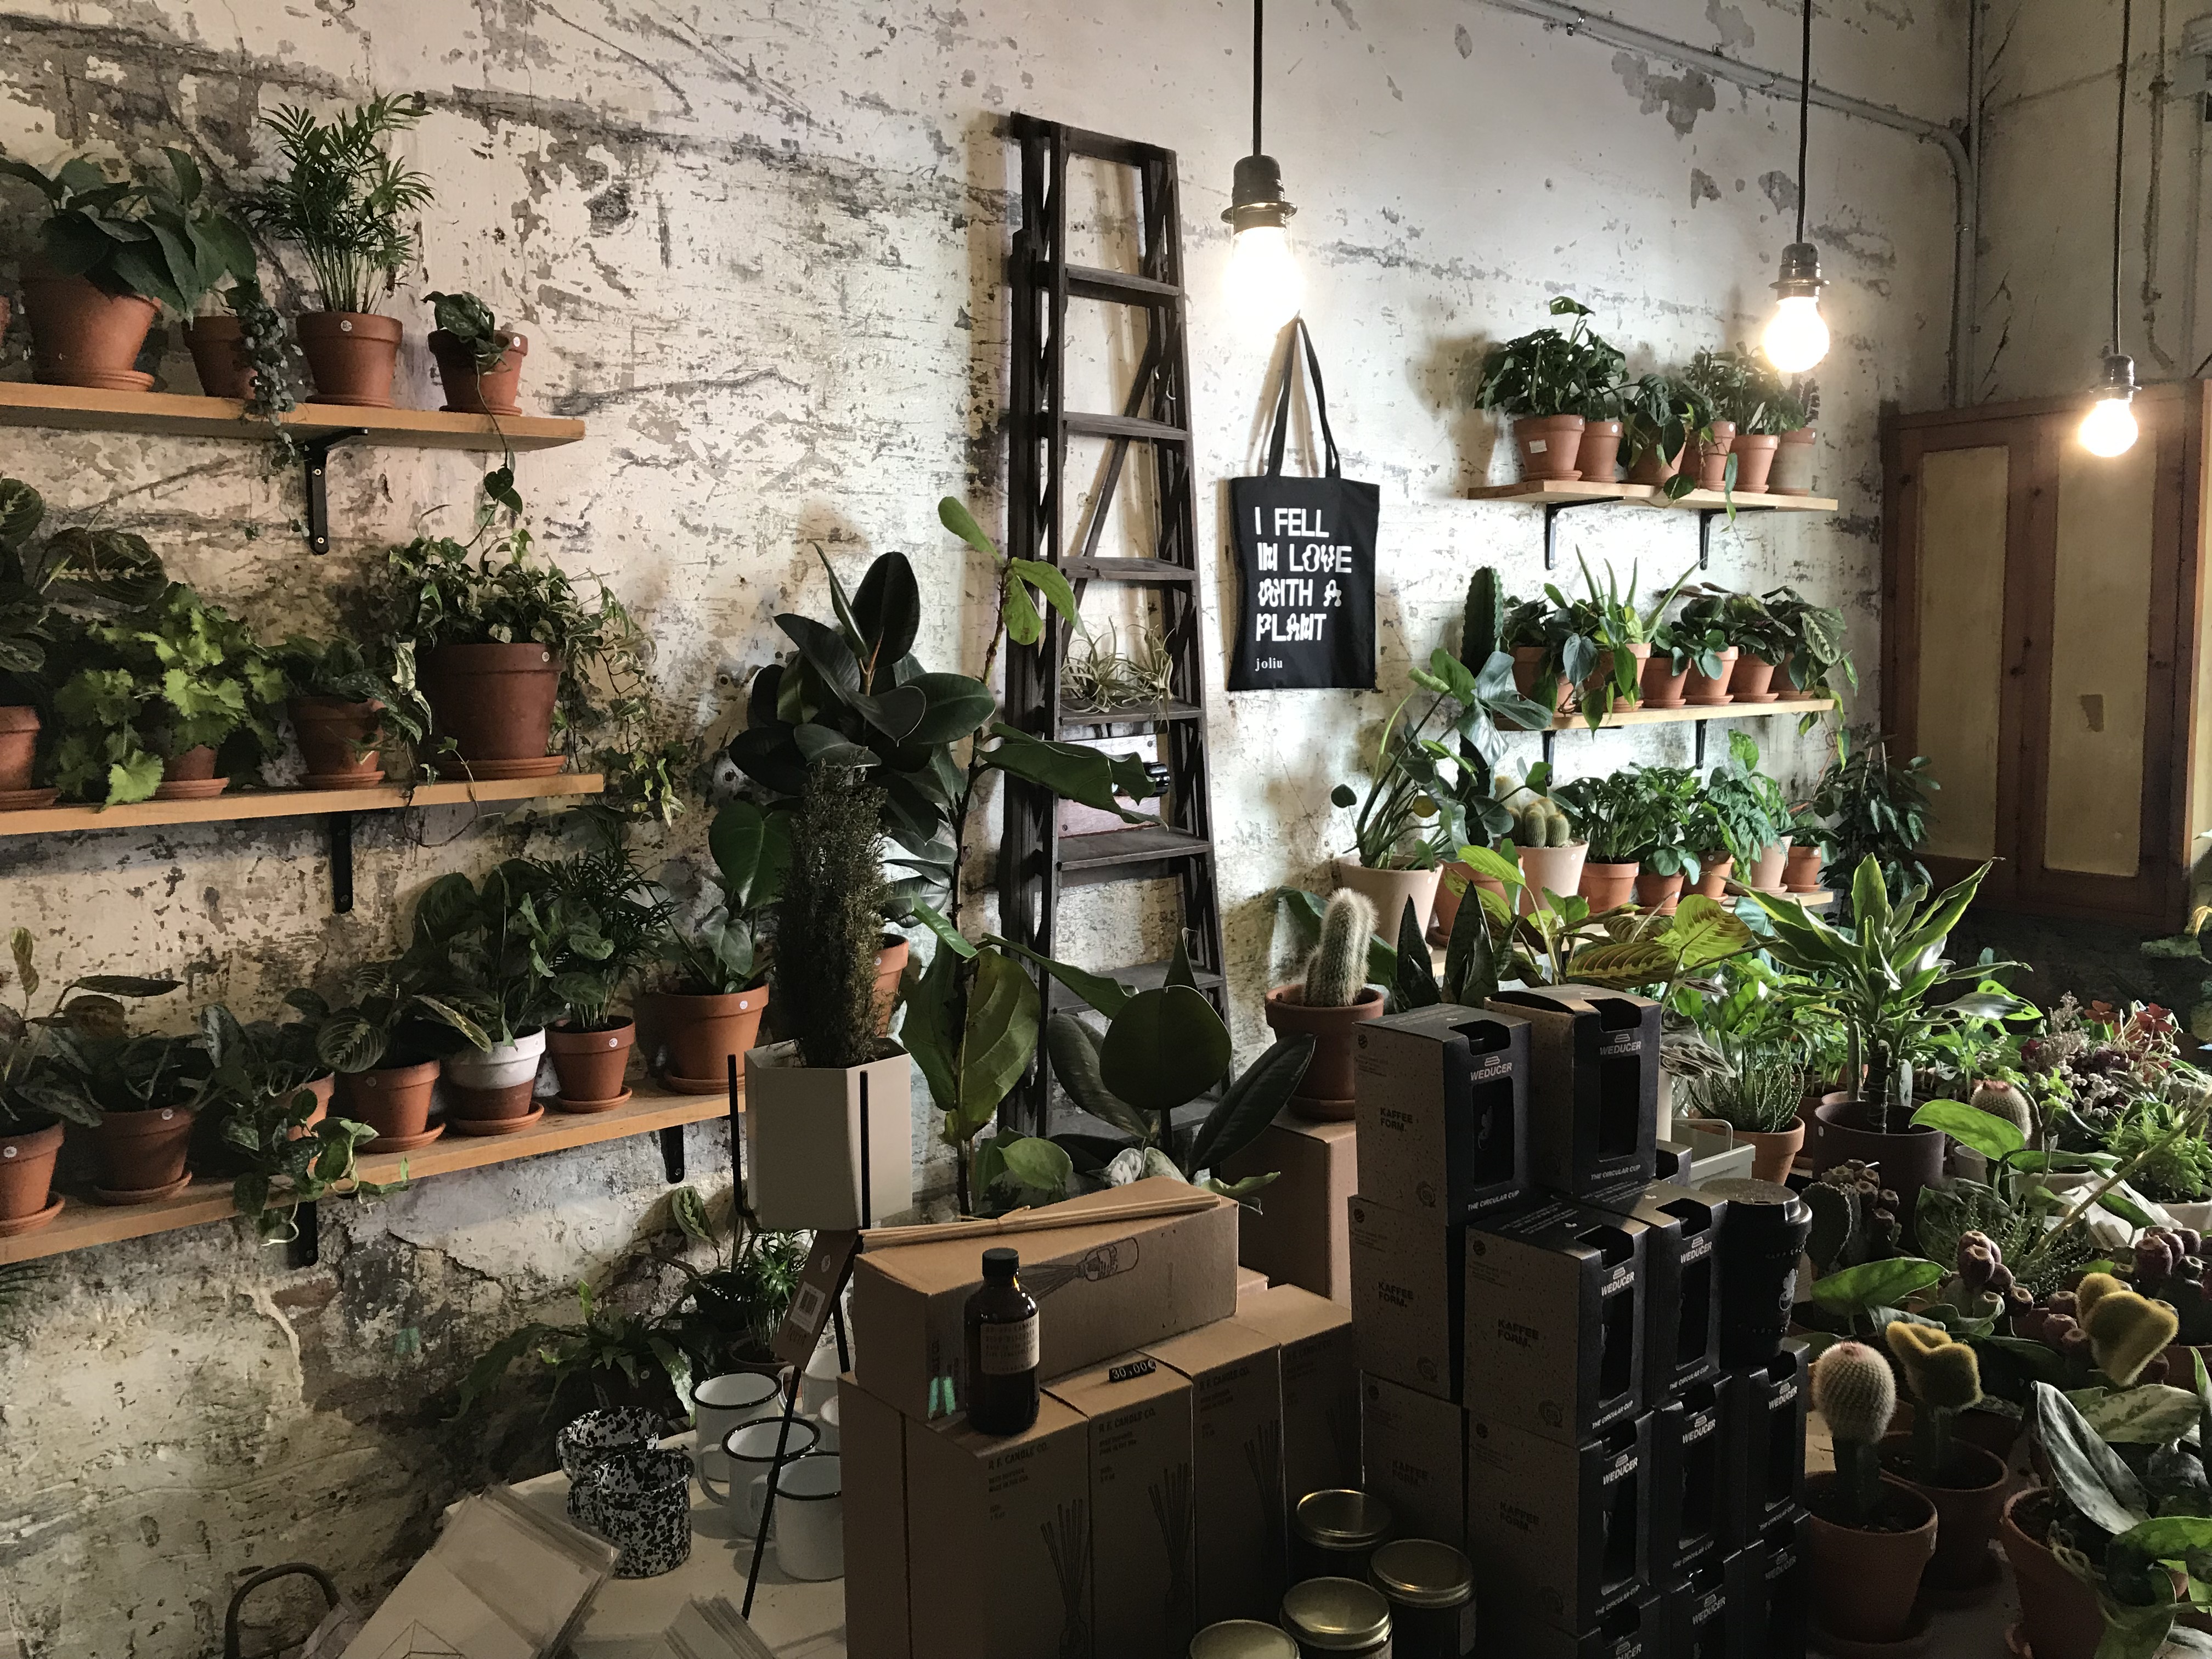 A plant store filled with a variety of greenery displayed on hanging shelves.